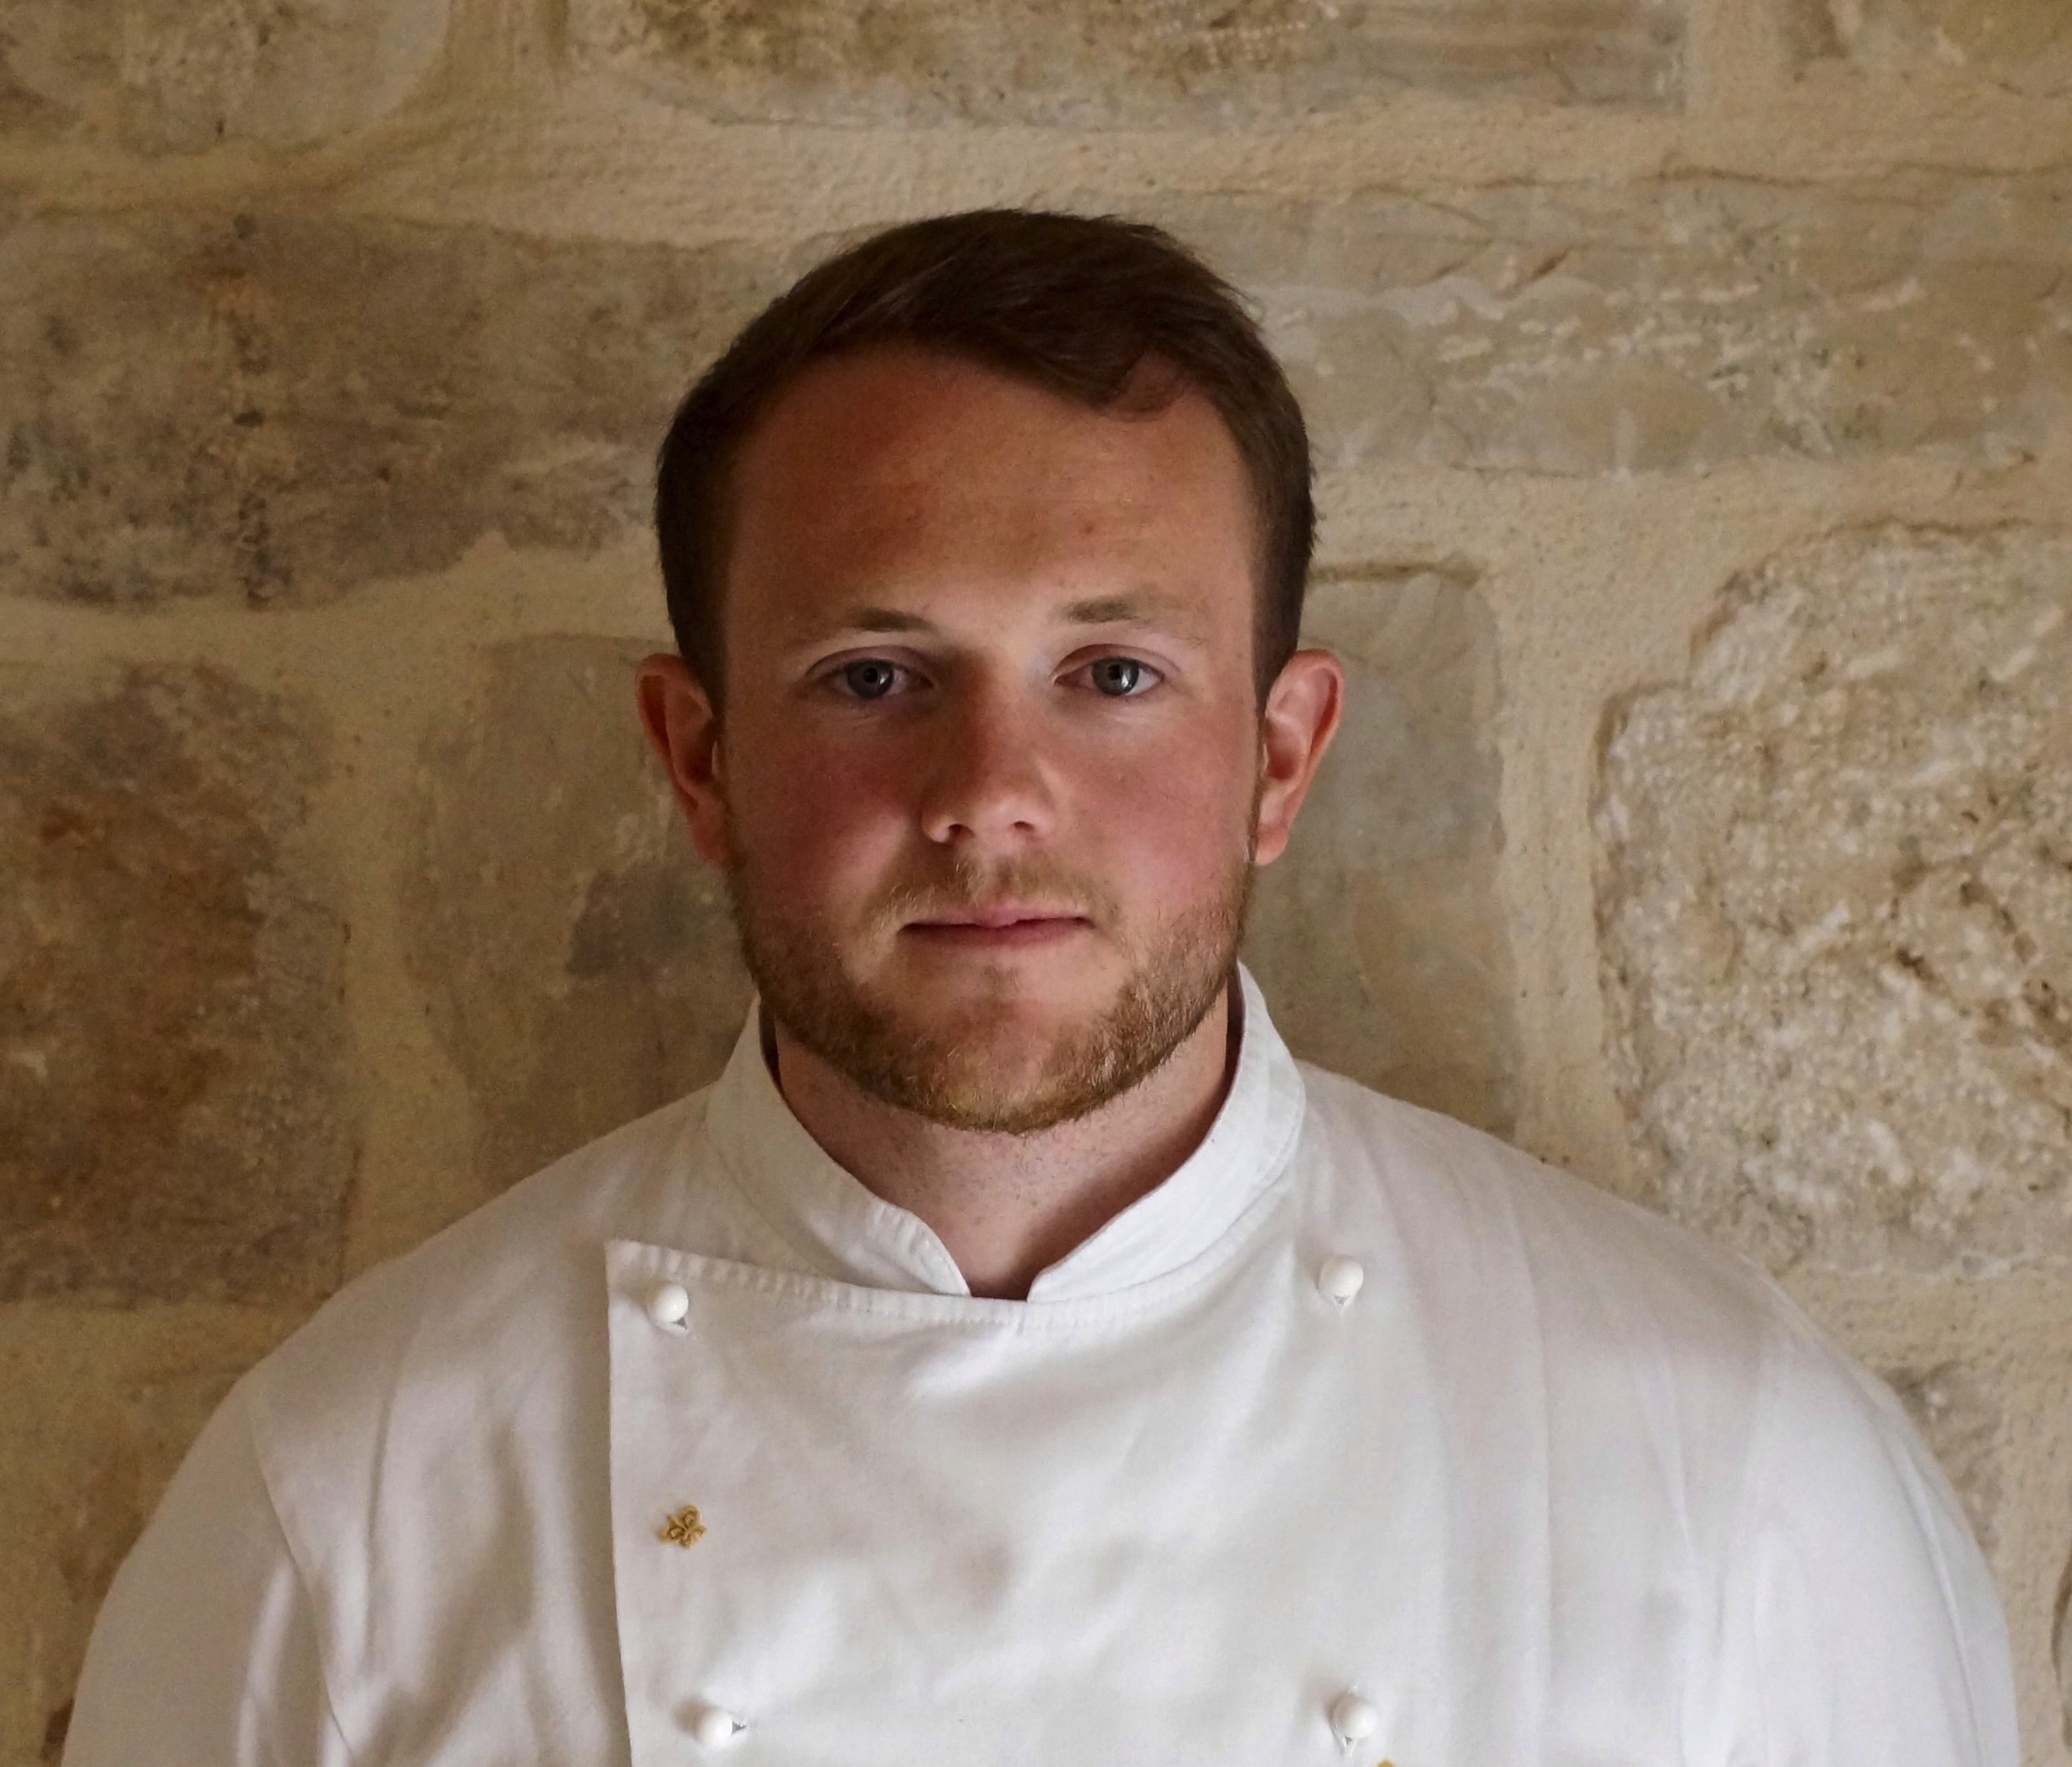 niall-keating-executive-chef-whatley-manor-hotel-and-spa